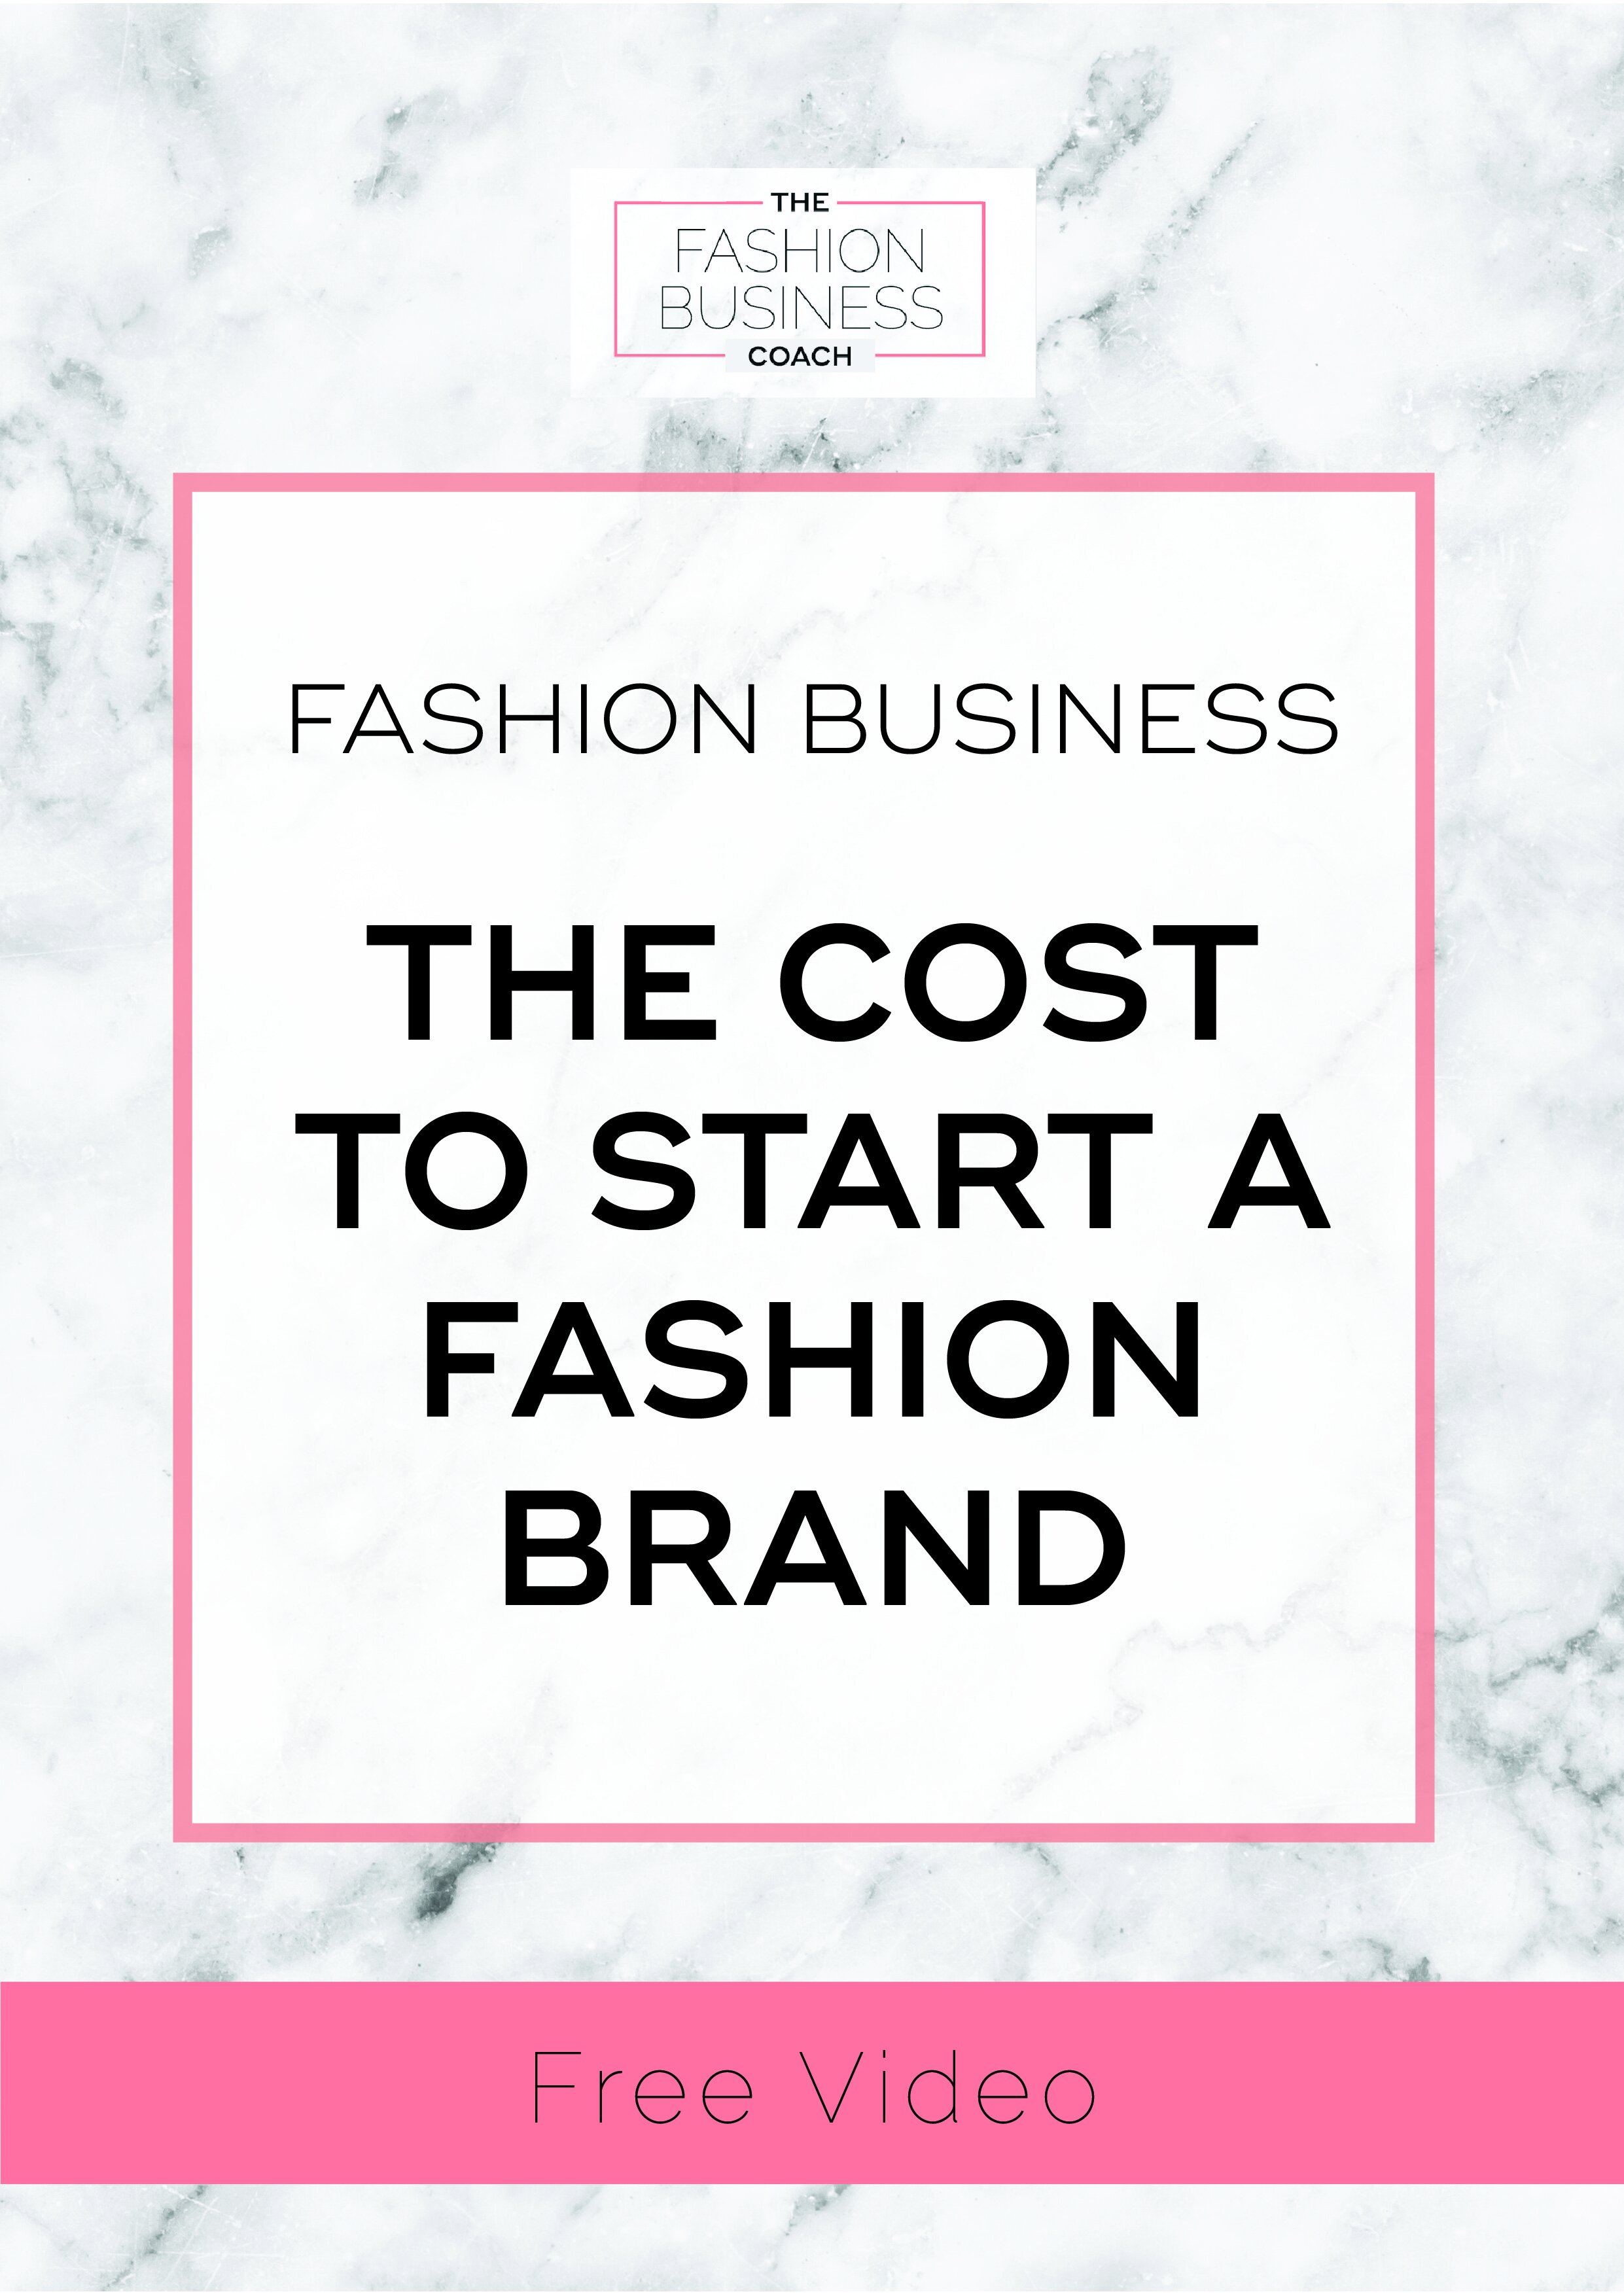 Fashion Business The Cost to Start a Fashion Brand 1.jpg